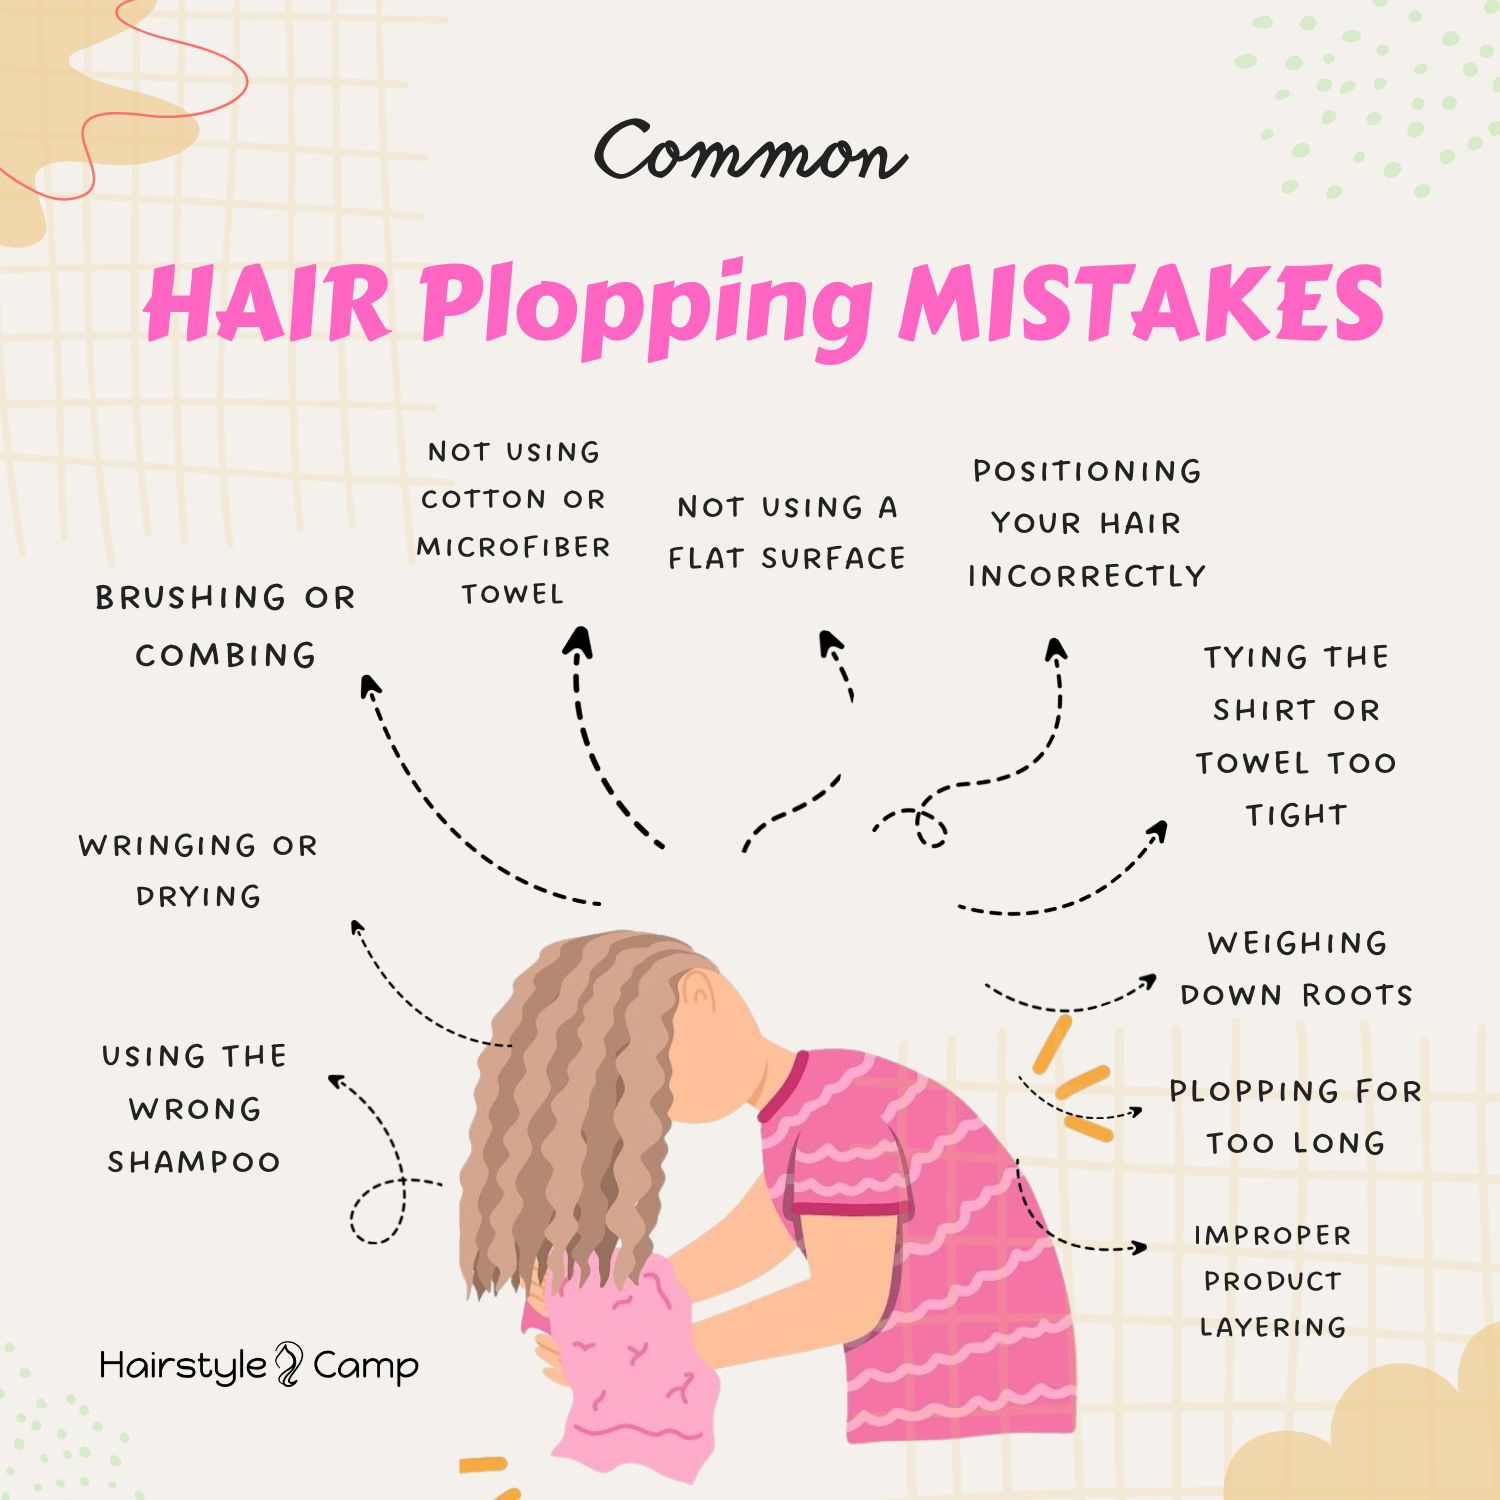 Hair plopping mistakes infographic